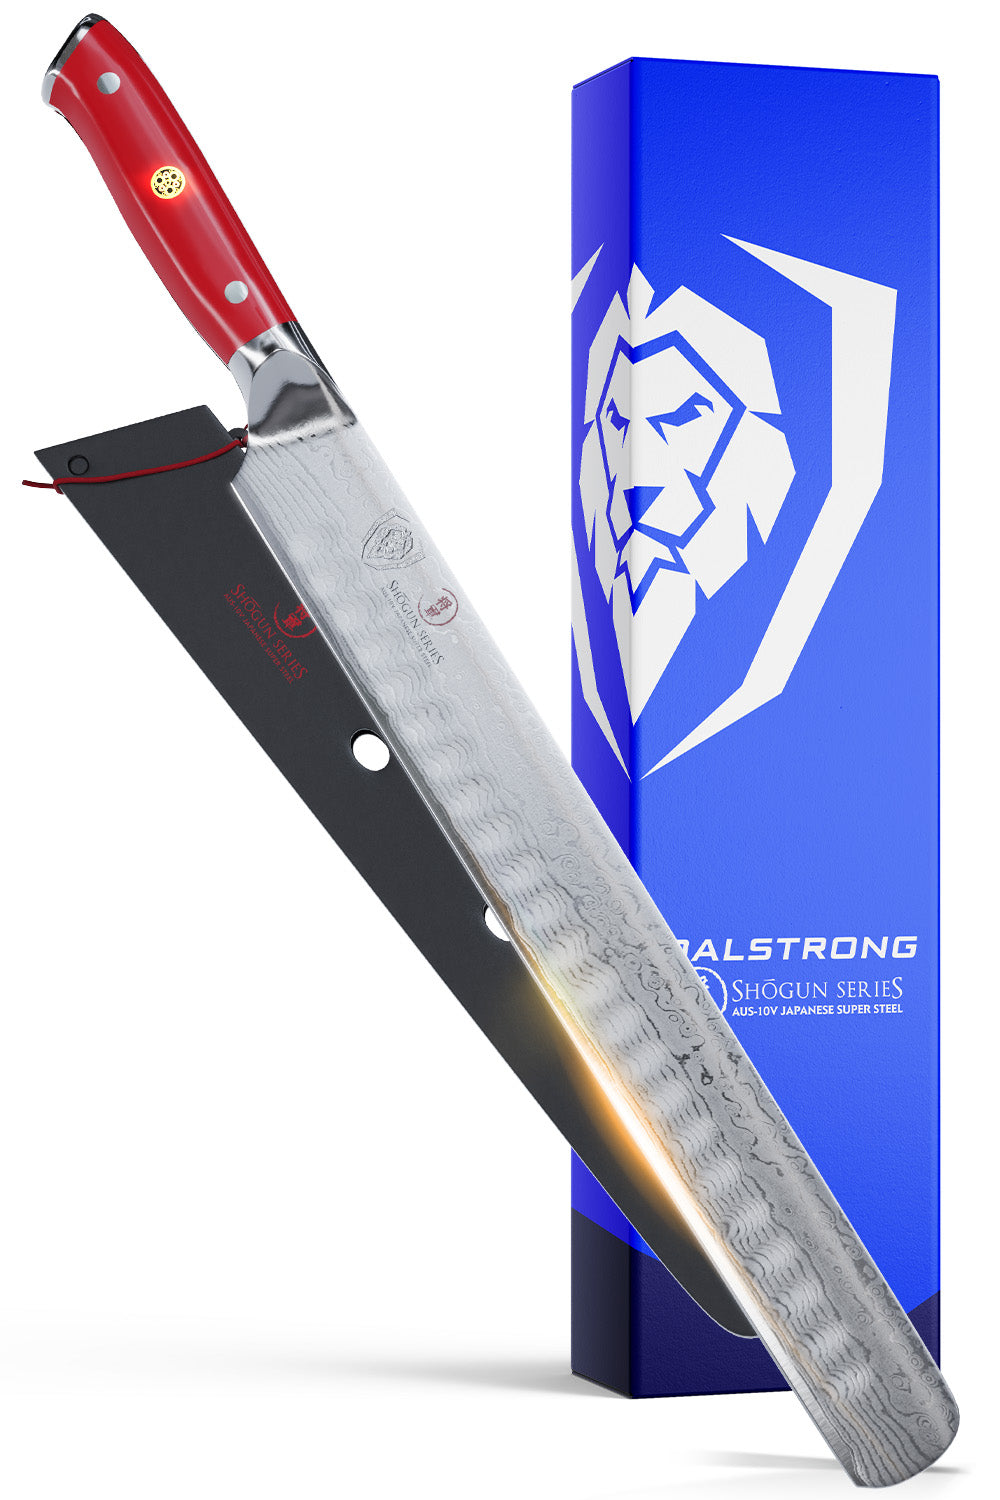 Slicing Carving Knife 12" | Crimson Red ABS Handle | Shogun Series | Dalstrong ©